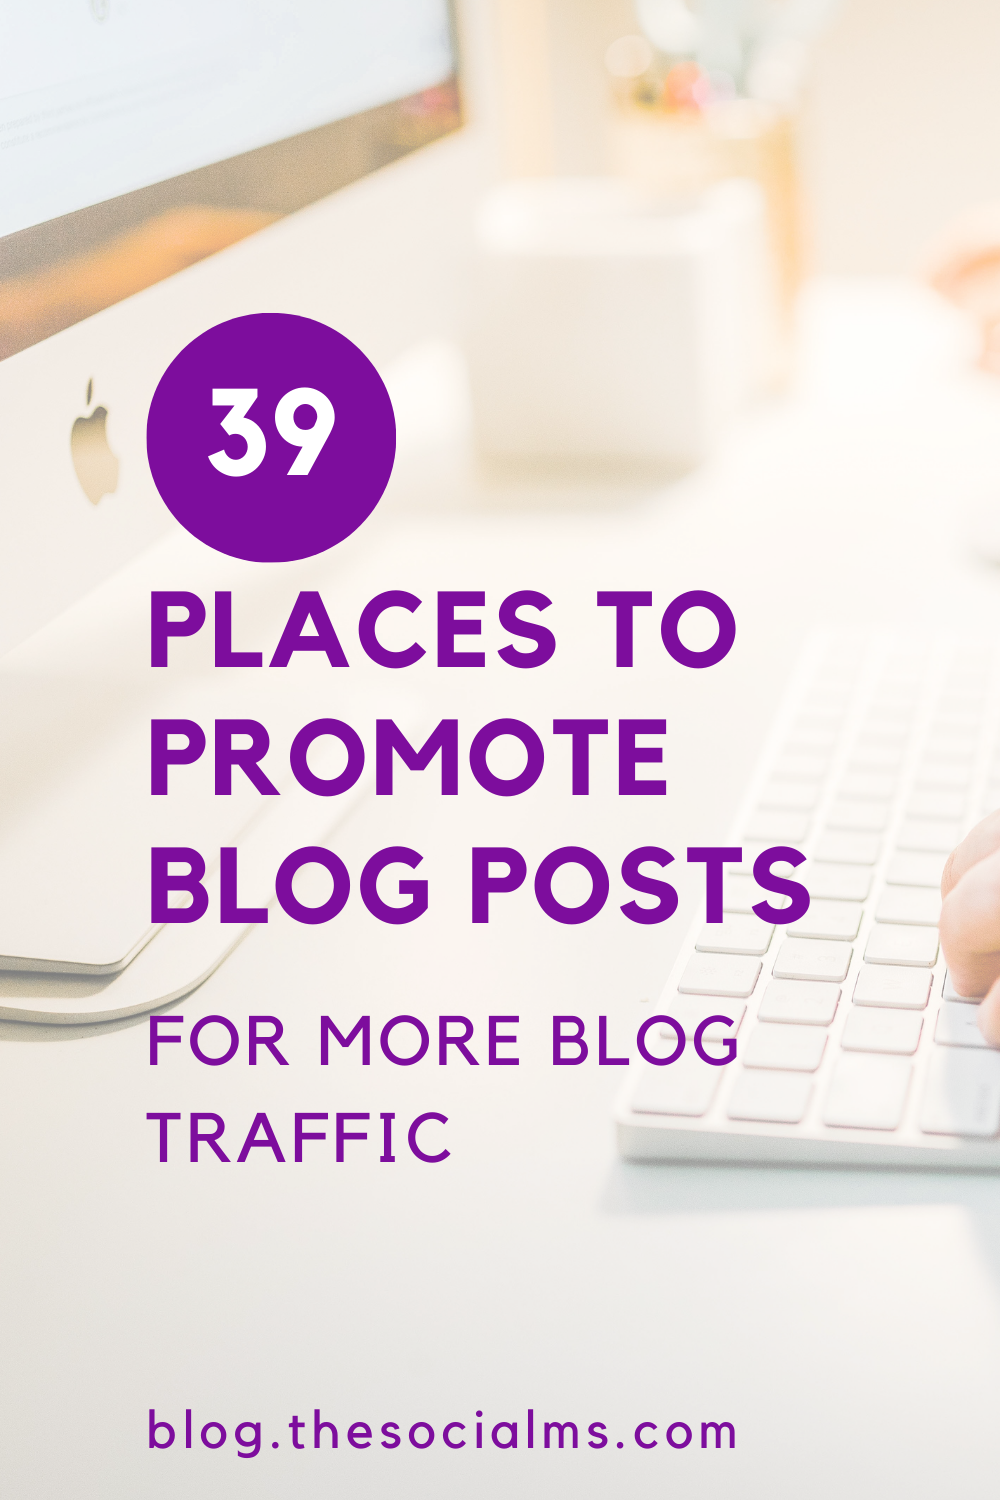 One major challenge bloggers face is getting enough visitors to their blogs. That means that we bloggers are always on the lookout for more places to promote blog posts to increase our blog traffic. You cannot wait for blog traffic generation to solve itself - you have to work for your blog traffic. So go ahead and start promoting your blog posts. #blogtraffic #trafficgeneration #blogtrafficgeneration